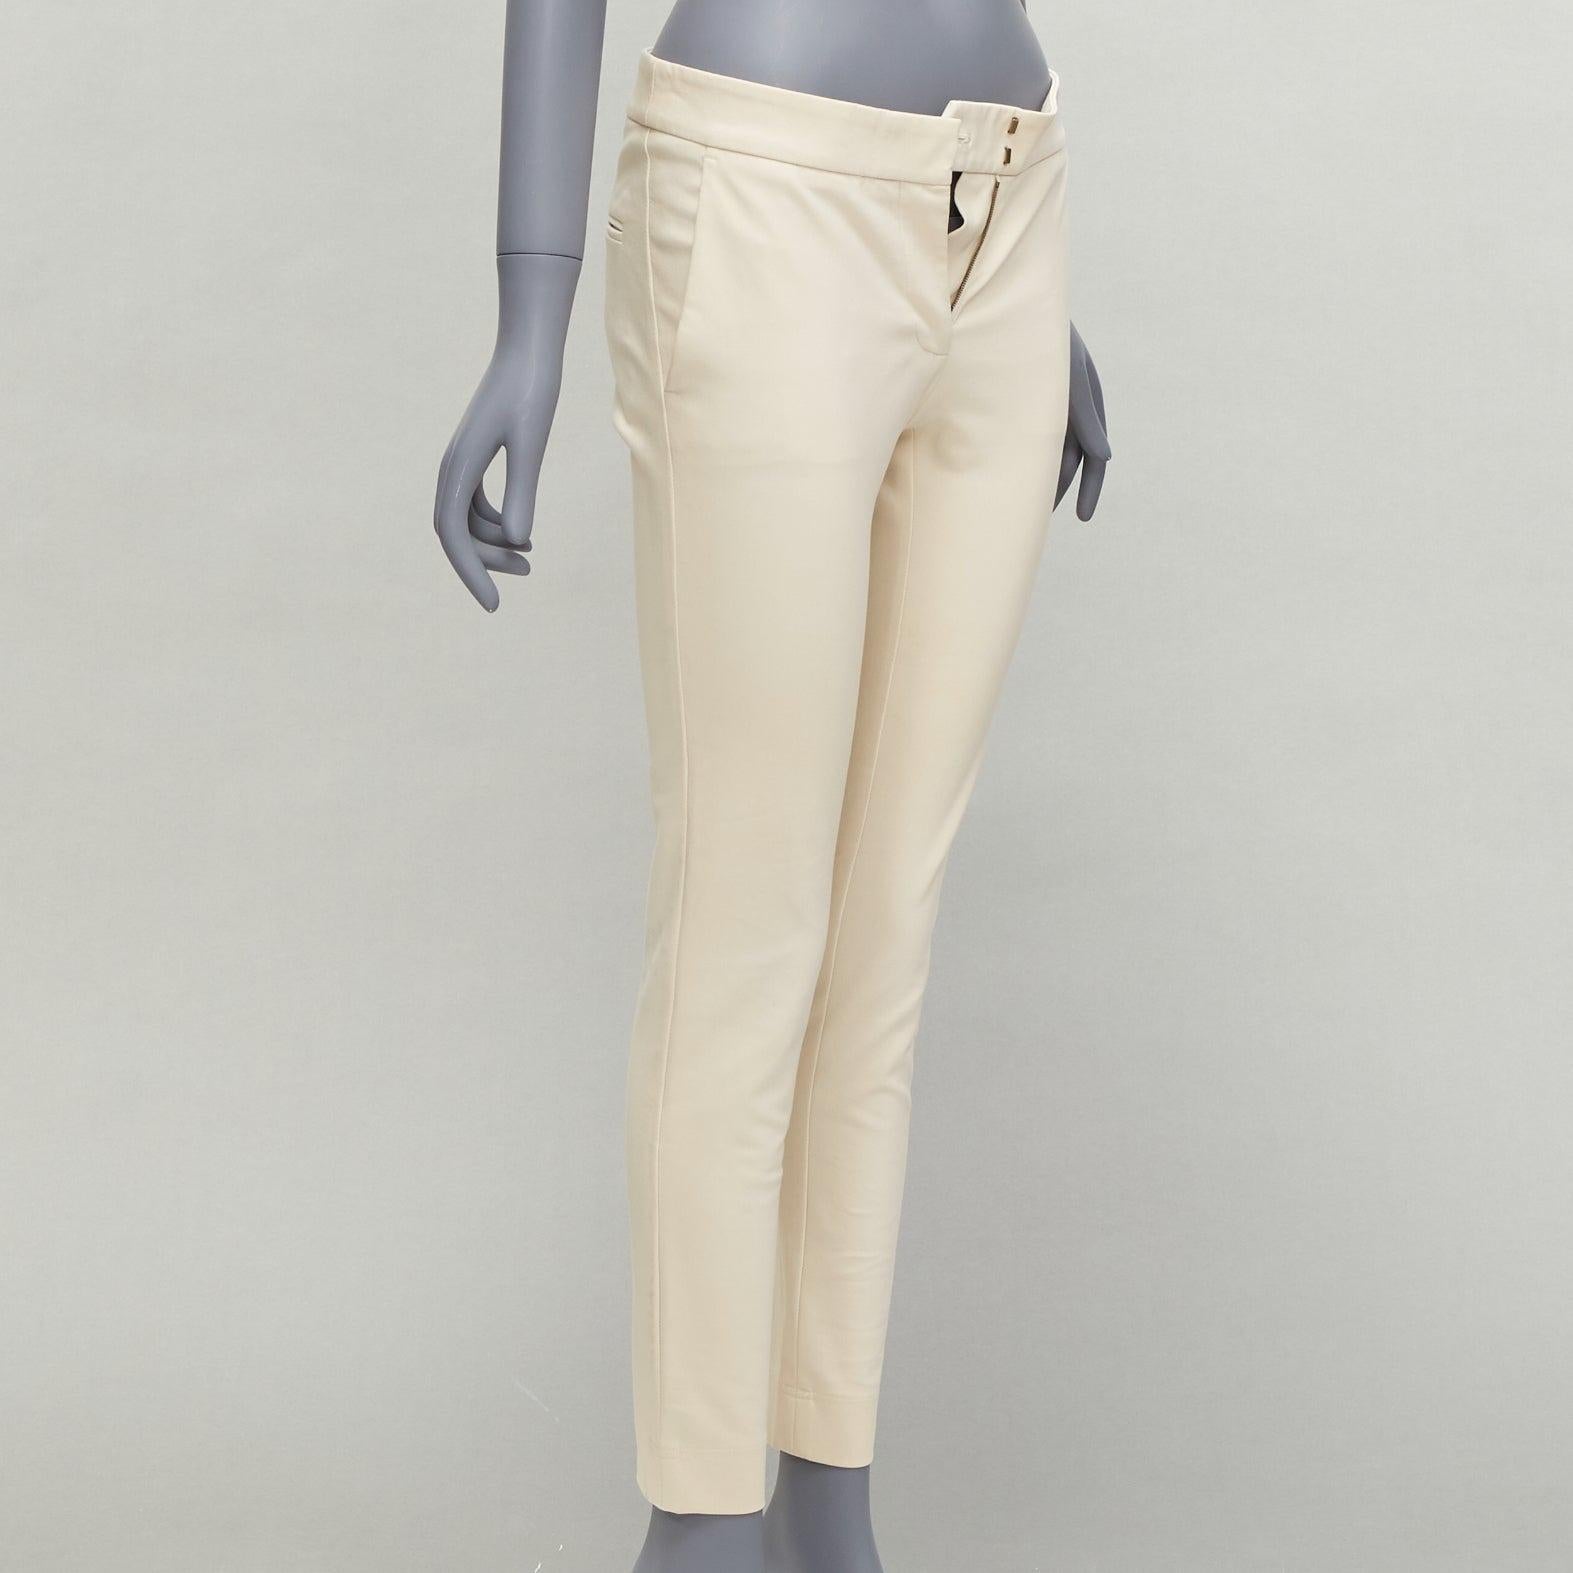 Beige STELLA MCCARTNEY cream cotton blend stretchy cropped skinny pants IT38 XS For Sale